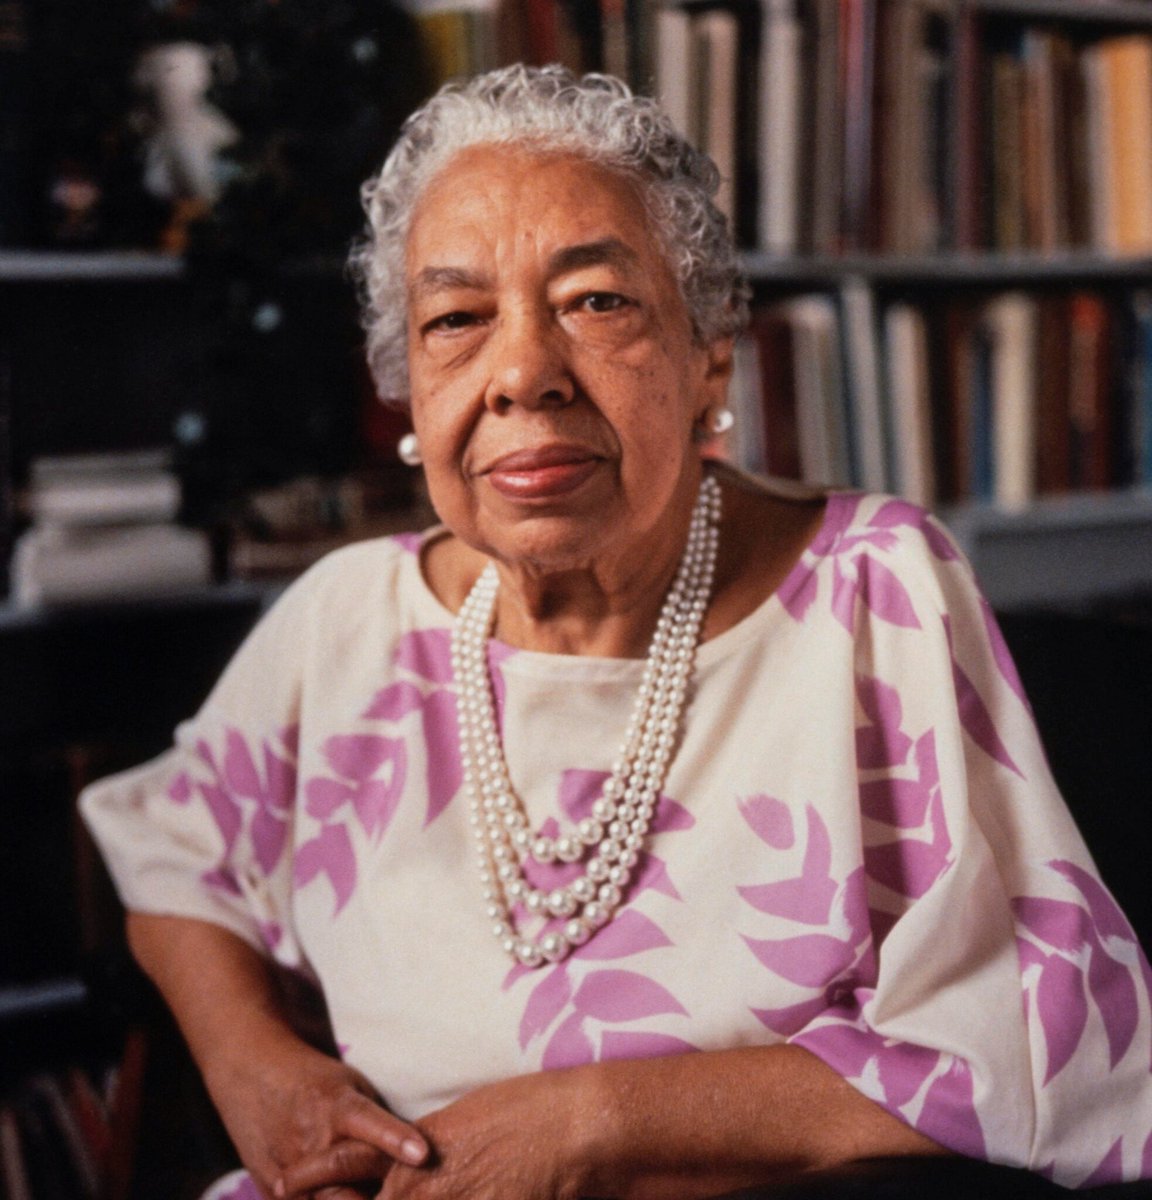 Click the link below to learn more about Alice Allison Dunnigan.

blackpast.org/african-americ…

#blackhistoryyoudidntlearninschool #blackhistory #blackhistoryeverymonth #blackexcellence #blackhistoryeveryday #blackhistoryisamericanhistory #blackhistoryrocks #todayinblackhistory